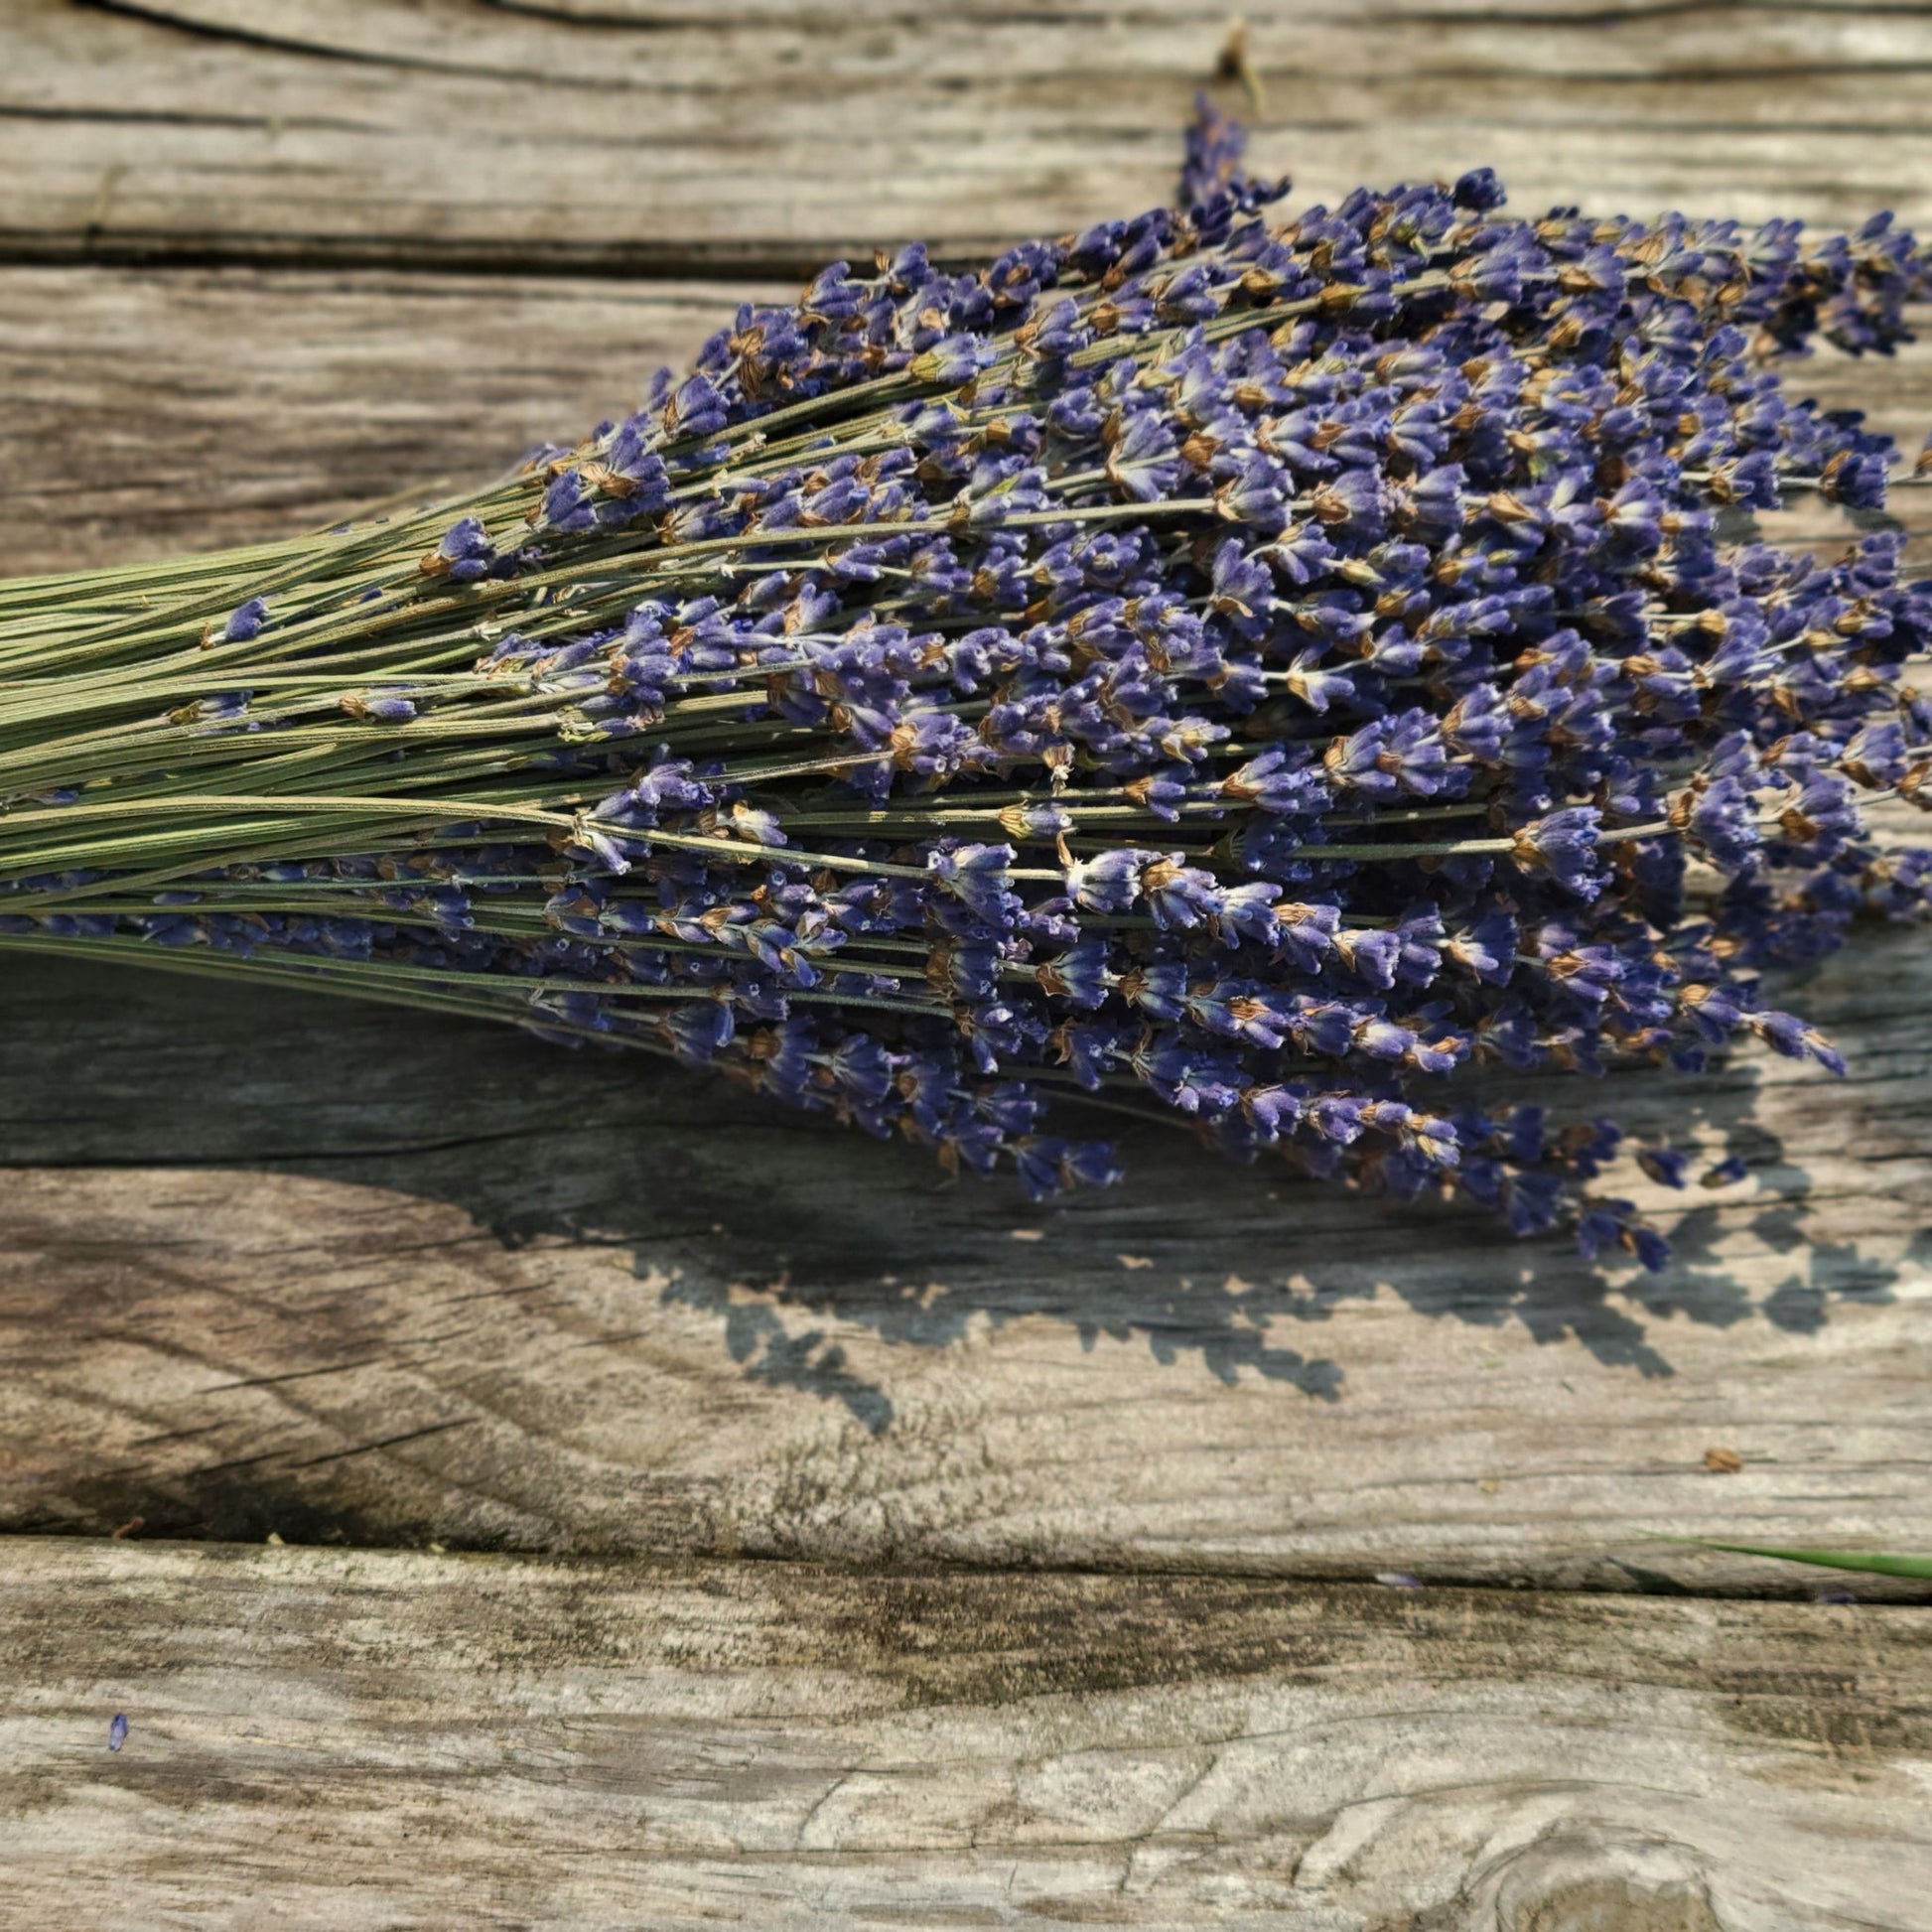 Dried lavender Bunches